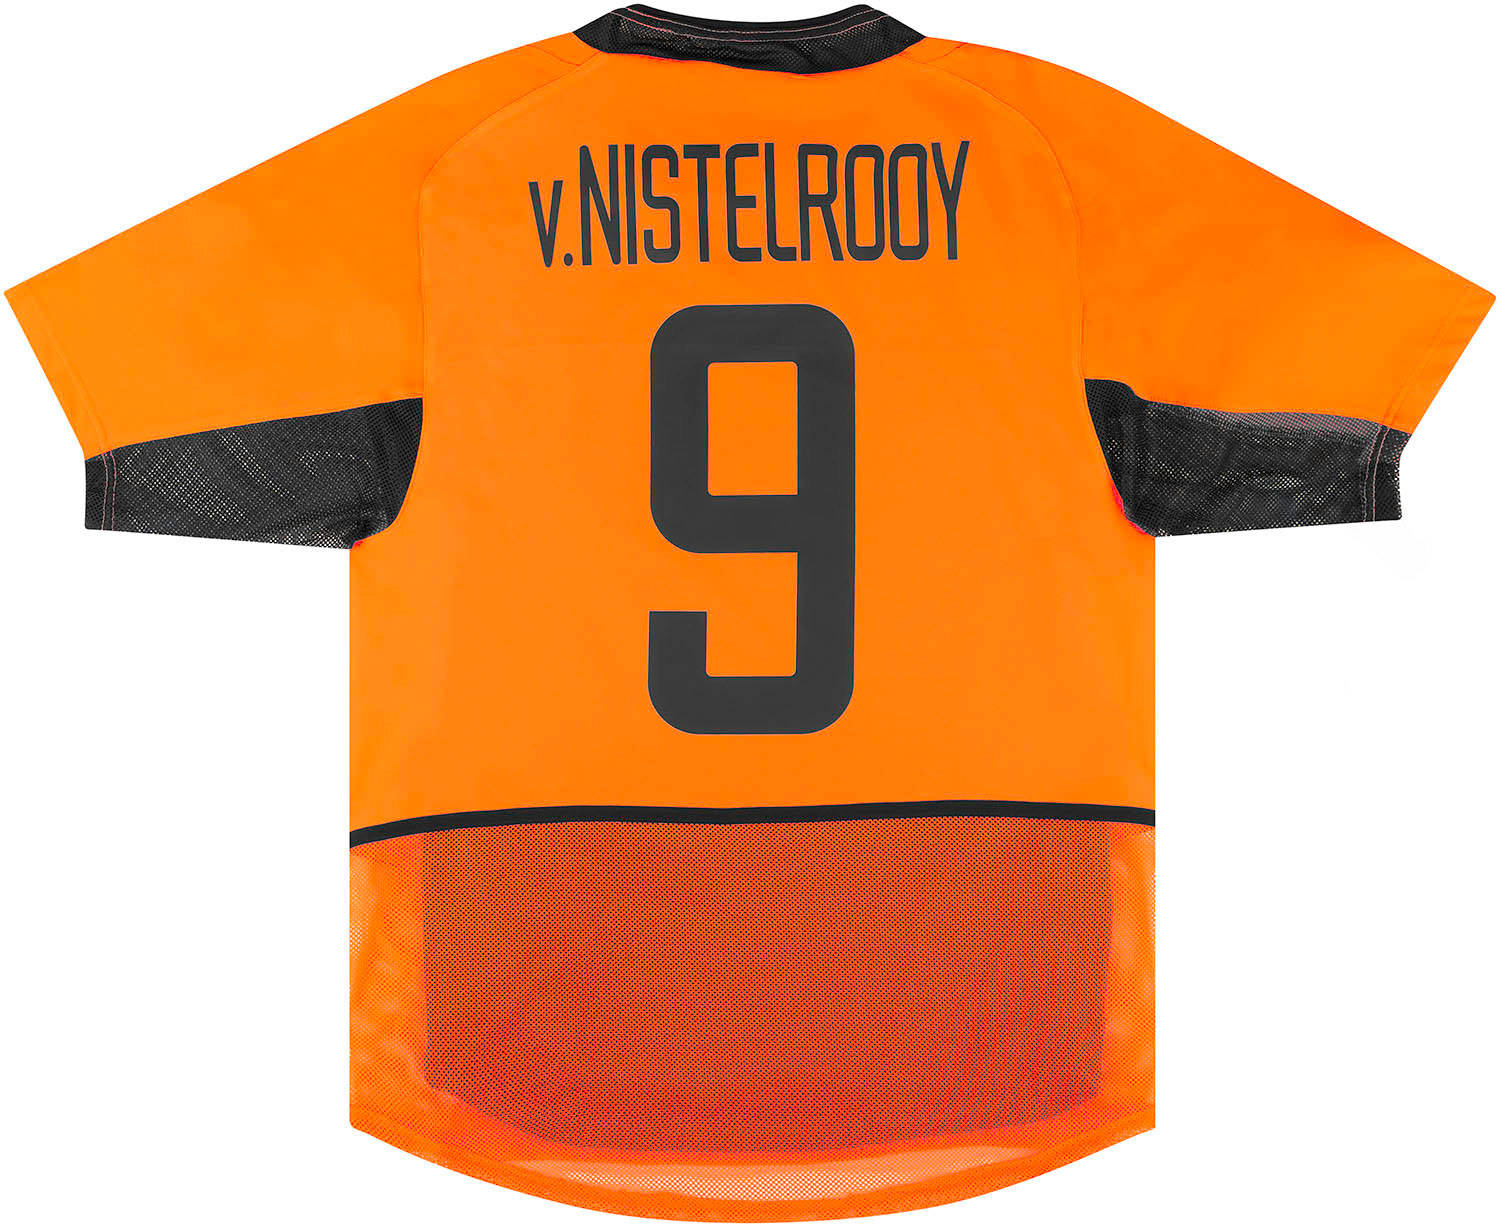 2002-04 Netherlands Player Issue Home Shirt v.Nistelrooy #9 (Excellent) L